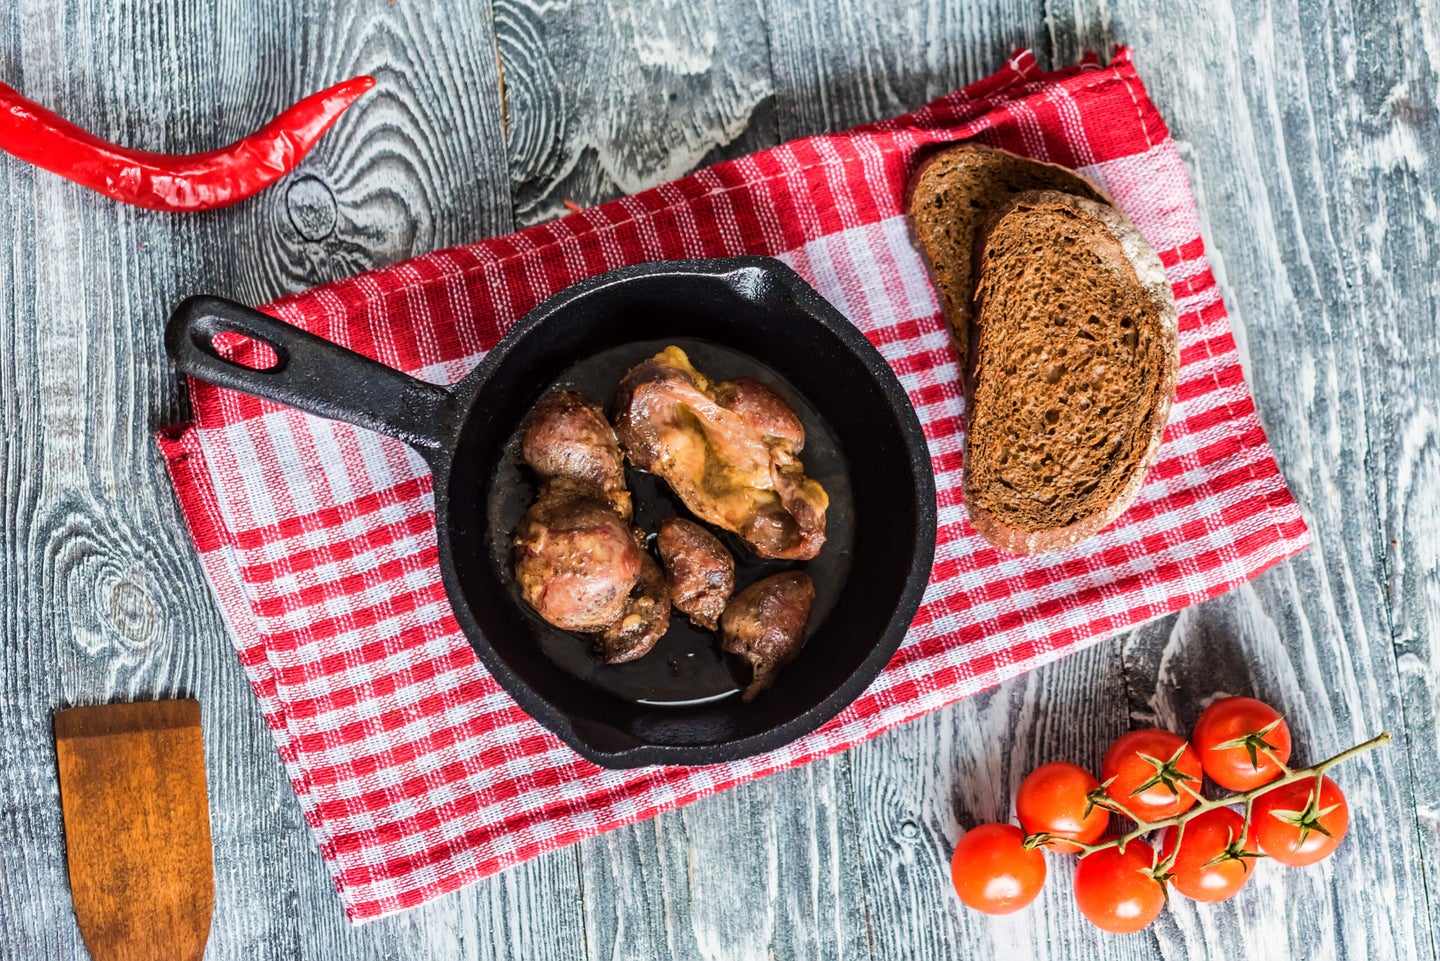 Turkey giblets cooked in a cast-iron skillet on a red-gingham napkin